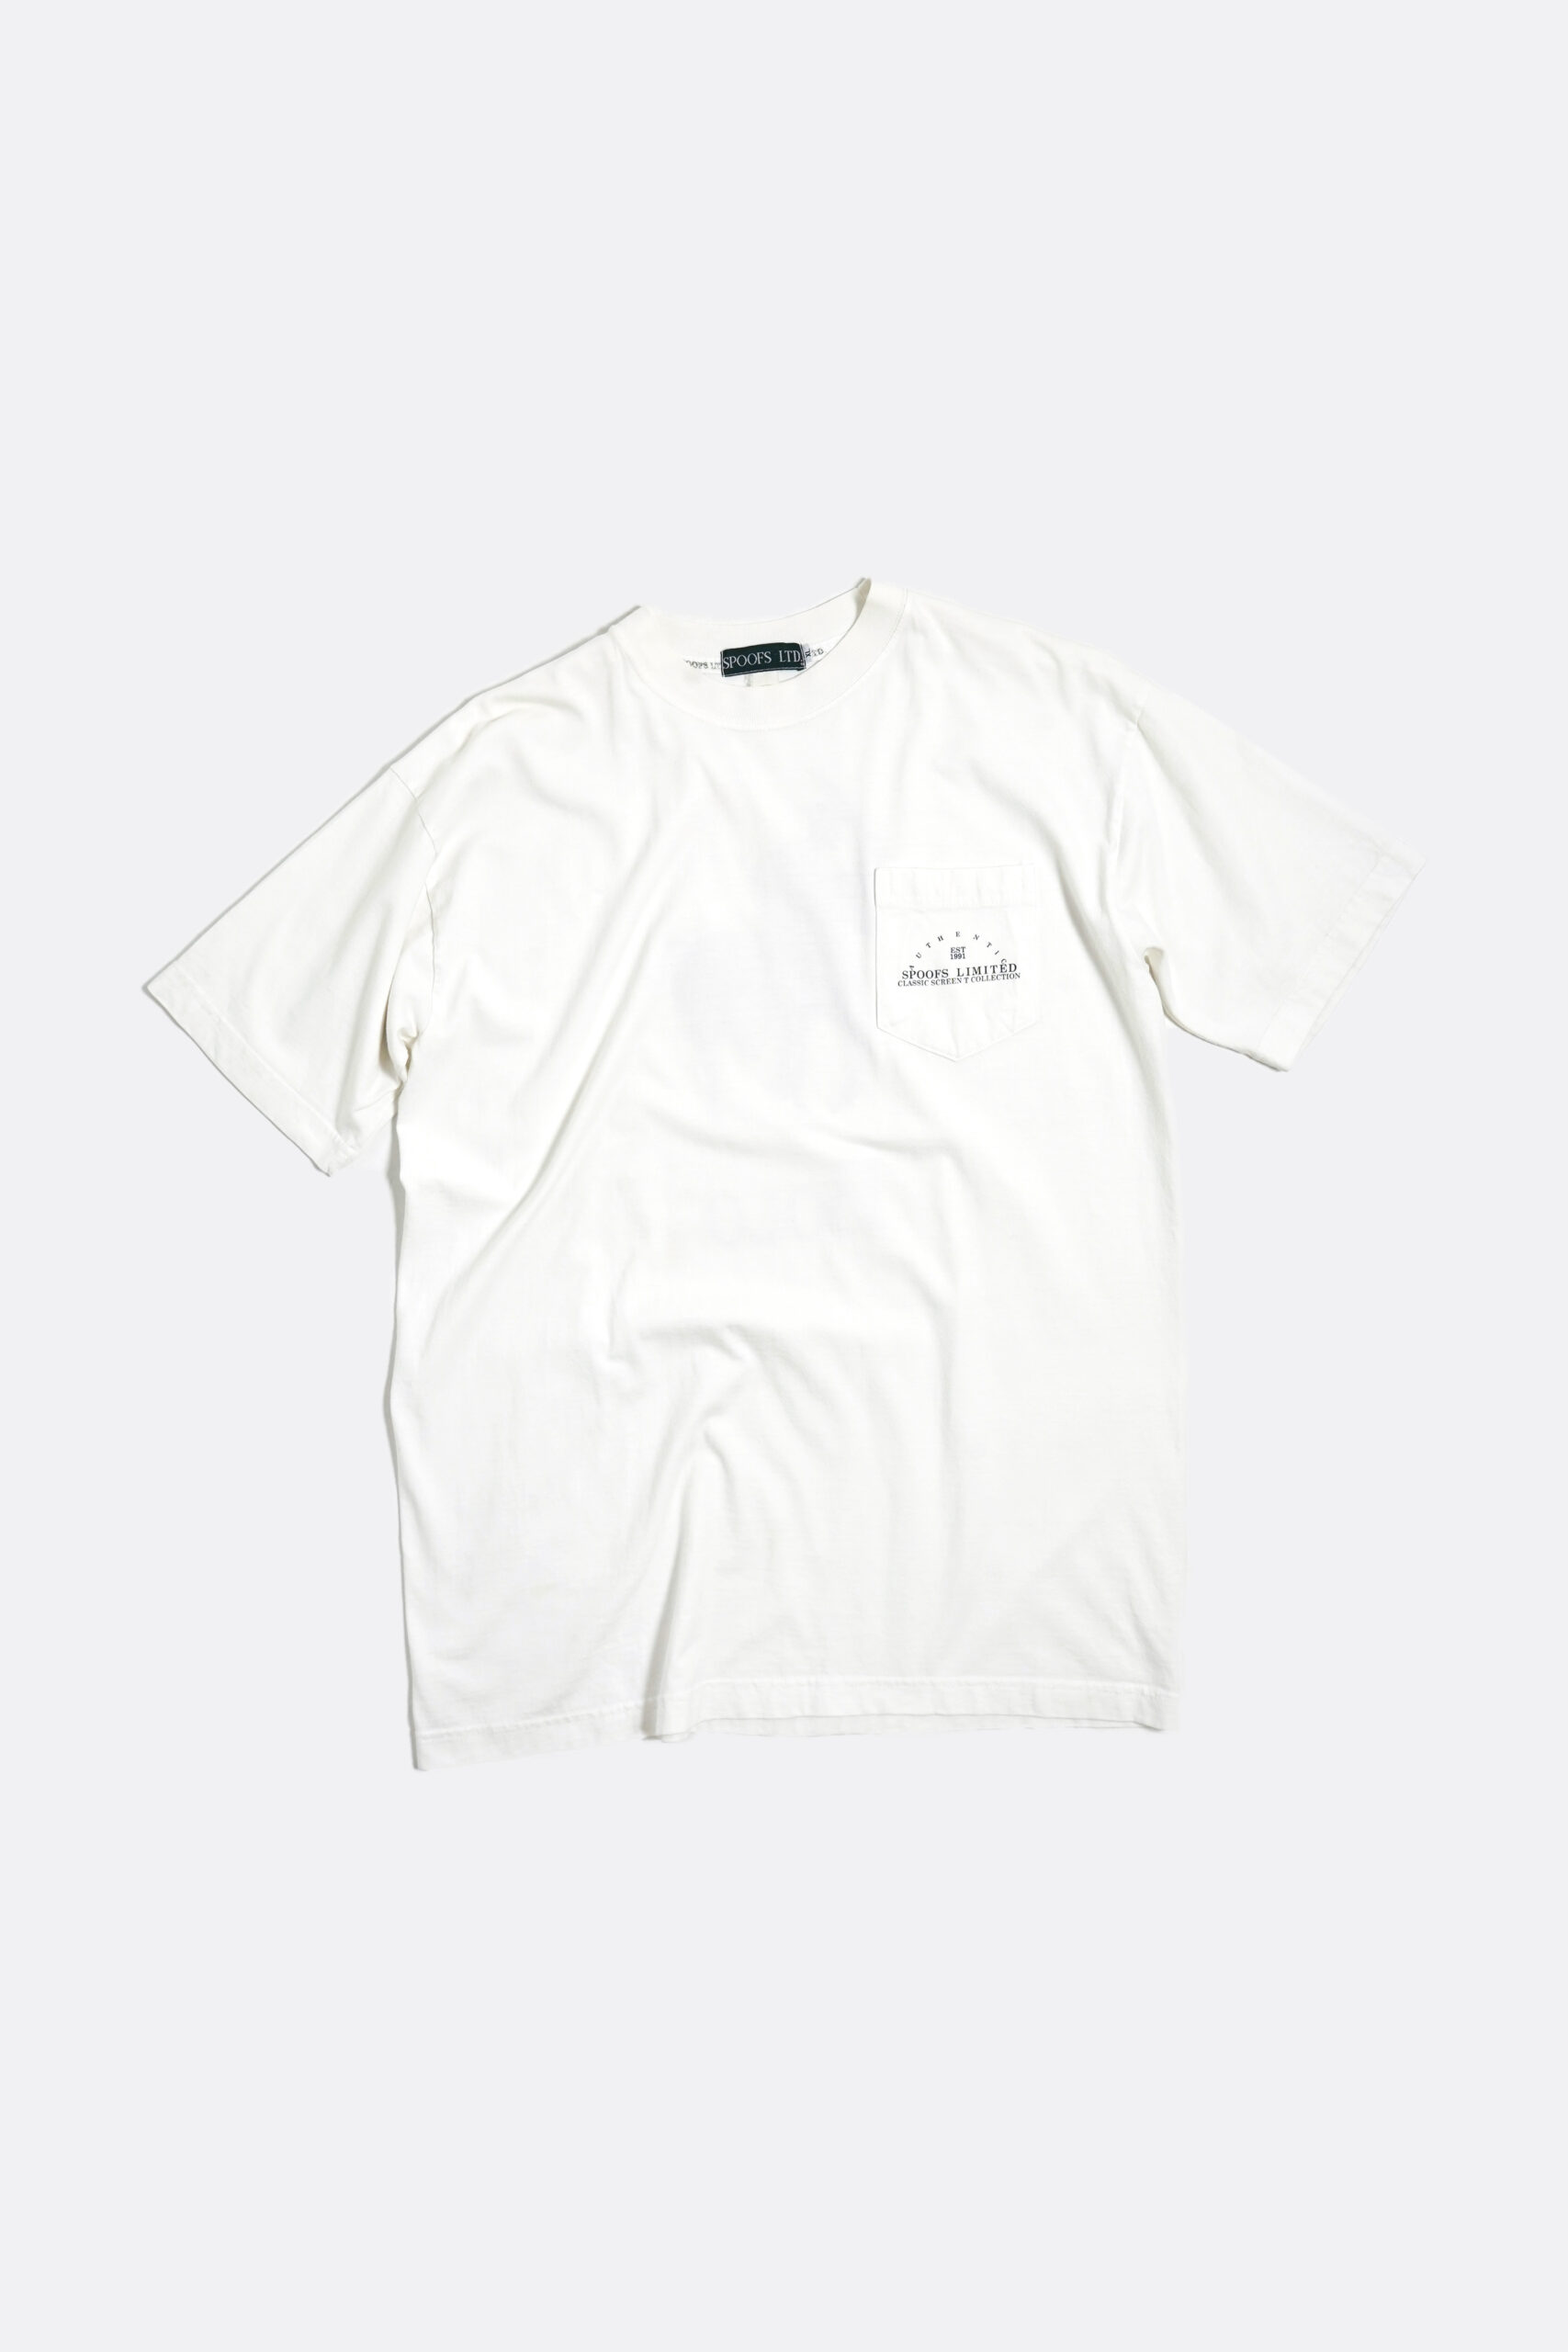 SPOOFS LIMITED BOLO TEE